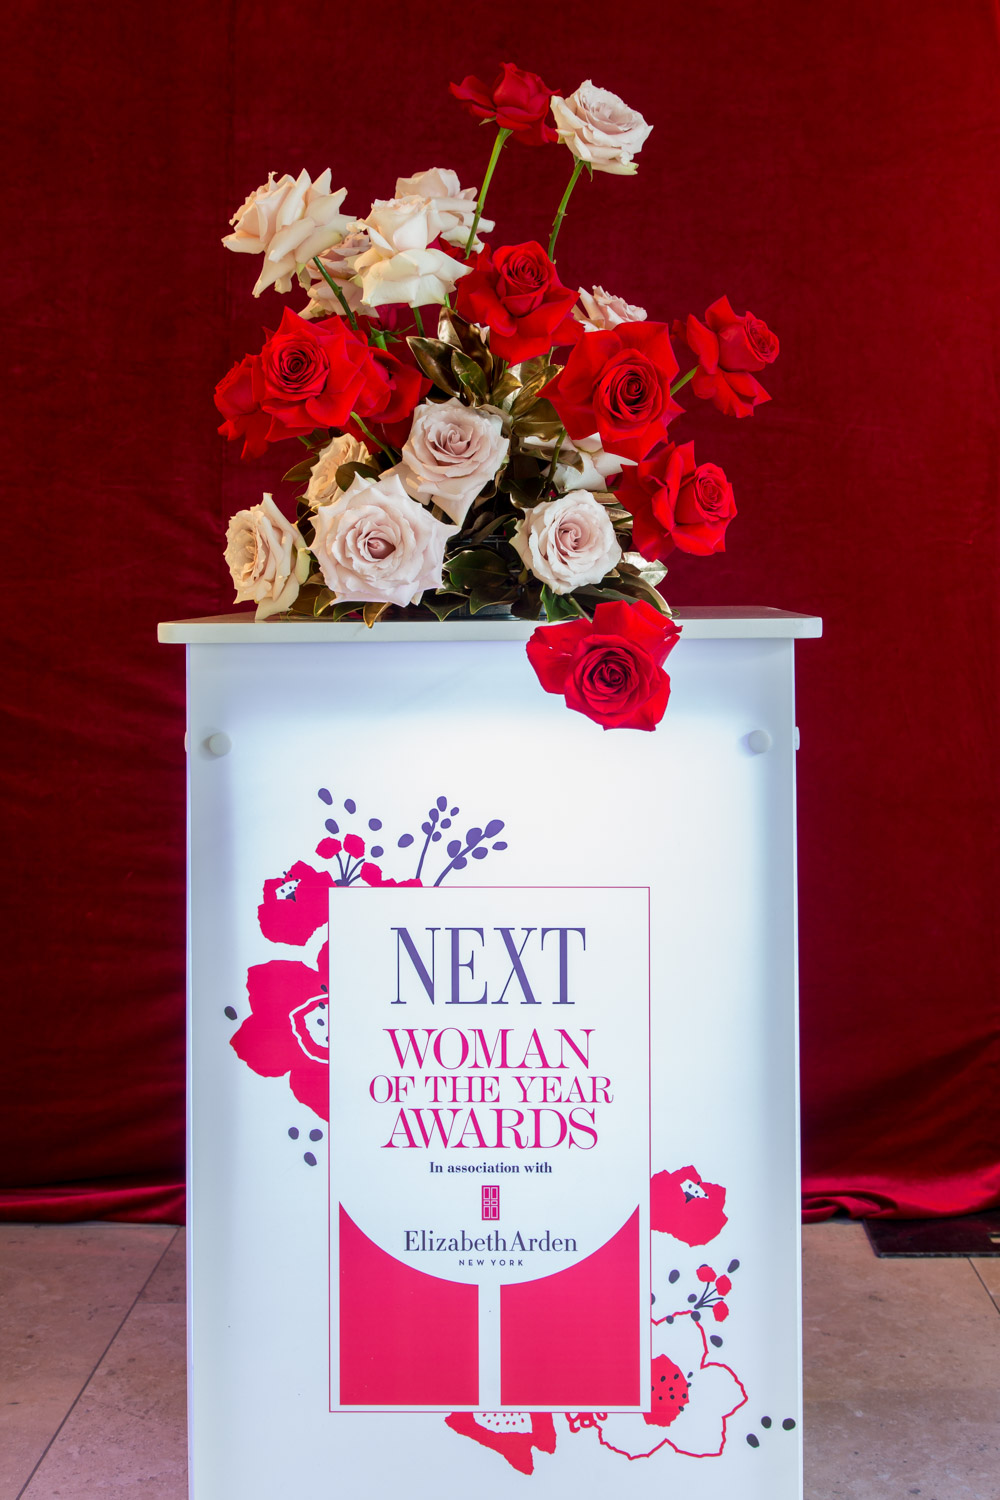 The NEXT Woman of the Year Awards 2017